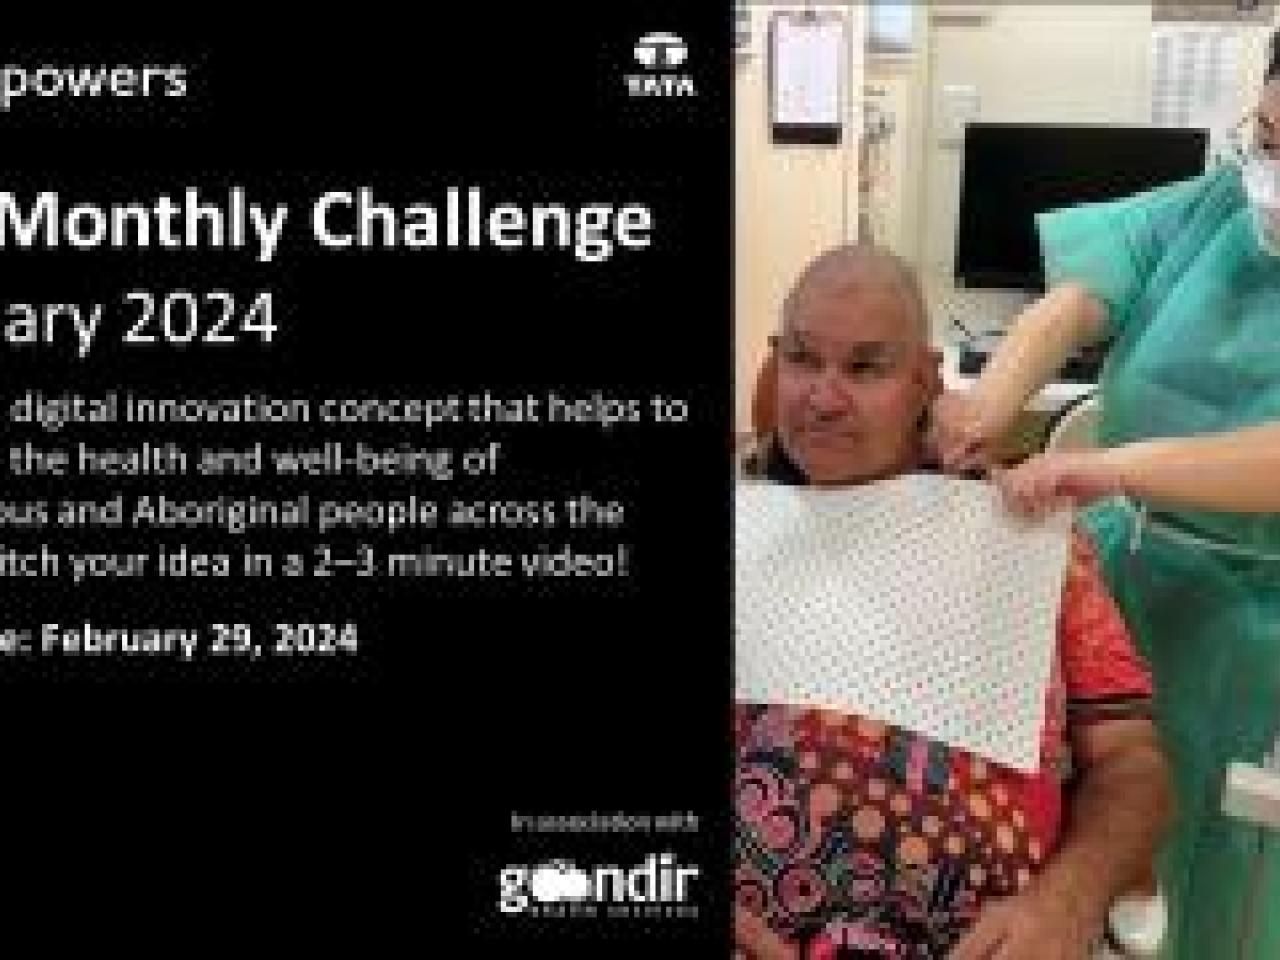 goIT Monthly Challenge February 2024: Create a digital innovation conception that helps to improve the health and well-being of indigenous and Aboriginal people across the globe. Pitch your idea in a 2-3 minute video! Deadline: February 29, 2024